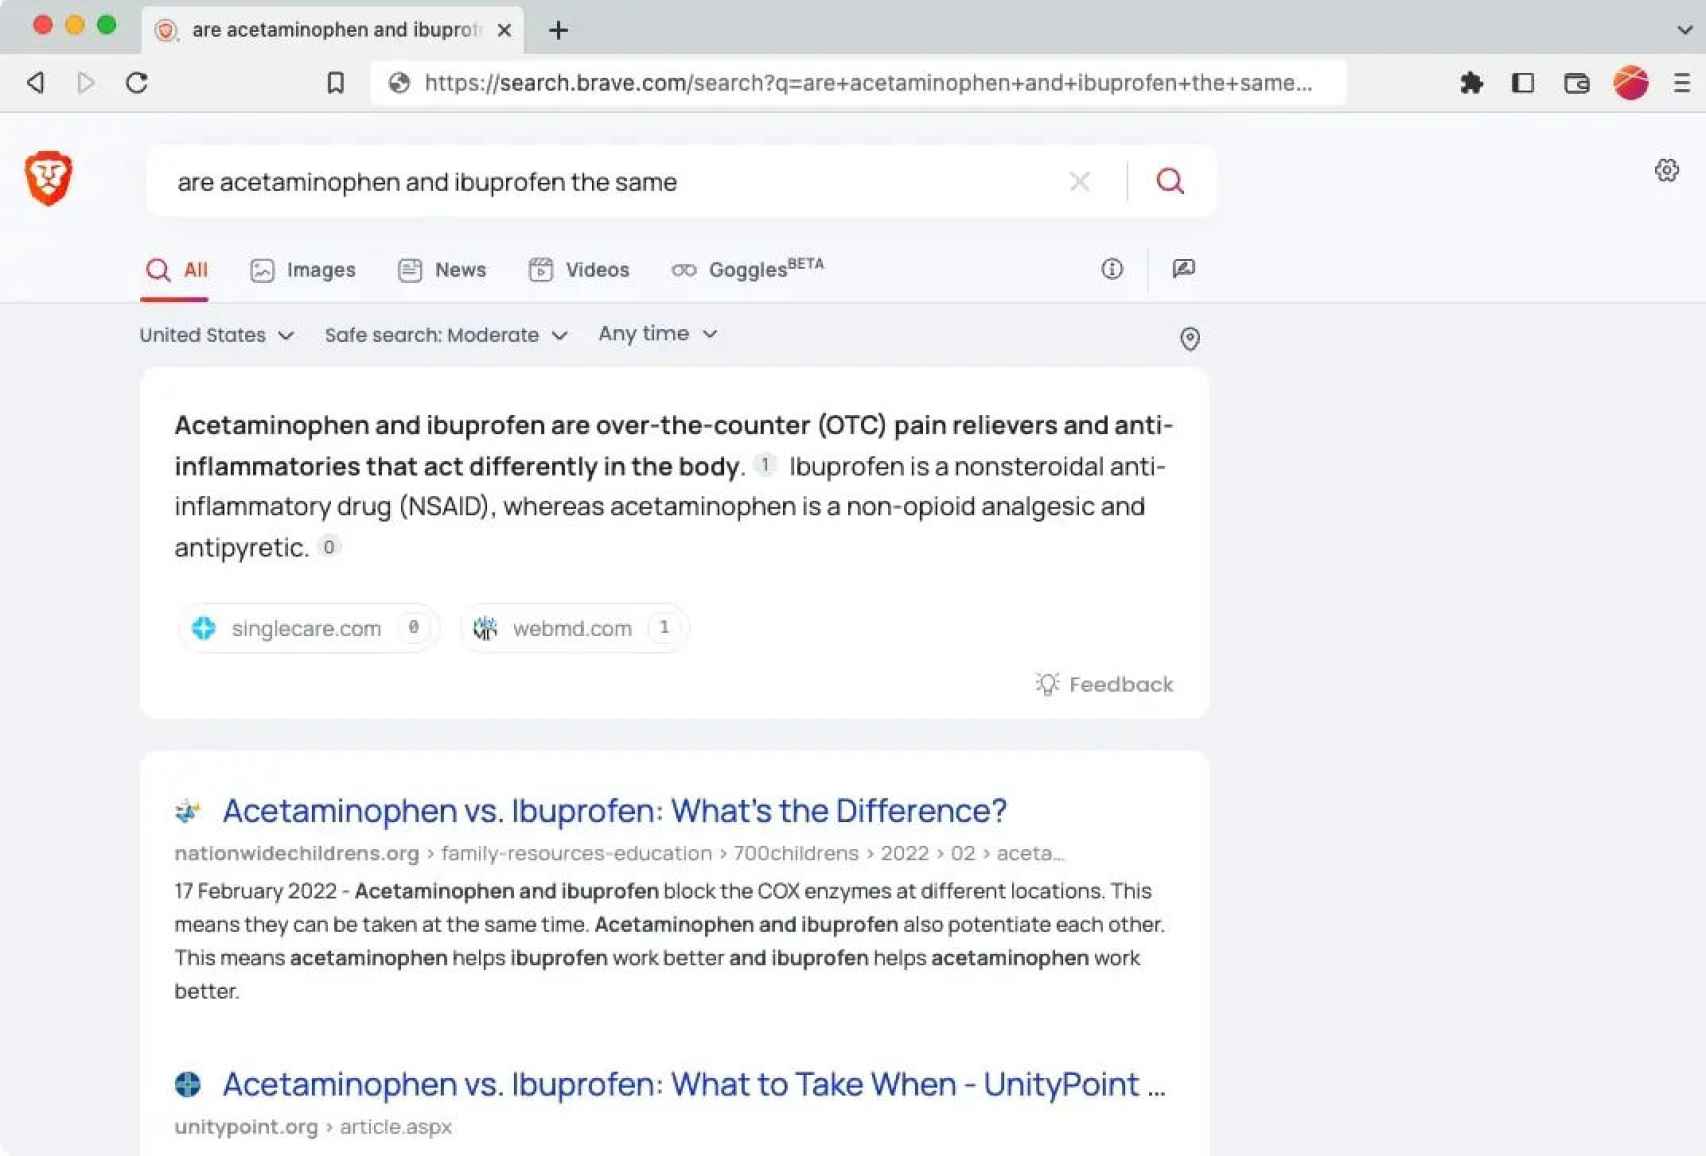 Brave's search engine now displays summaries using artificial intelligence